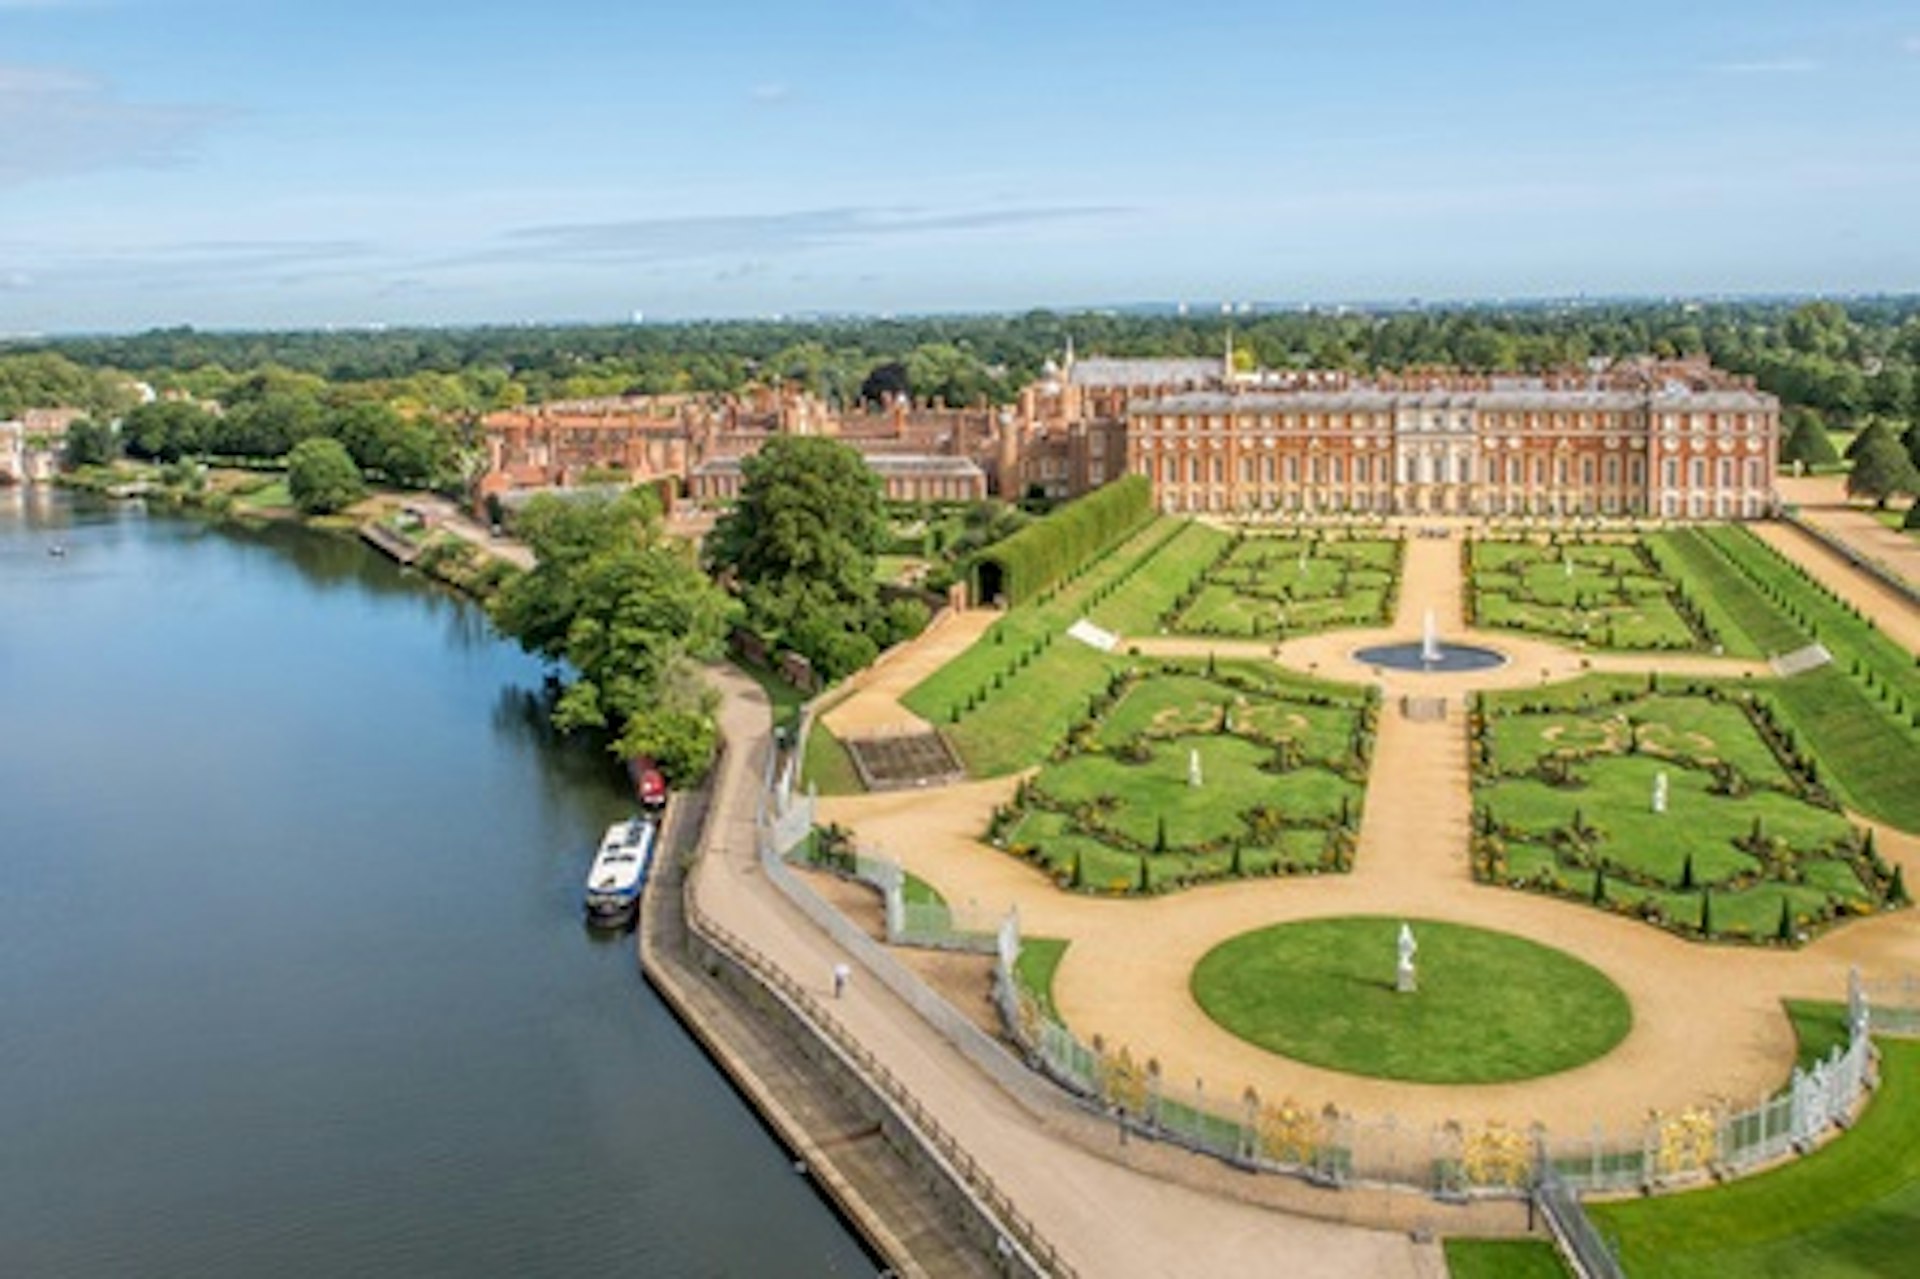 Visit to Hampton Court Palace for One Adult and One Child